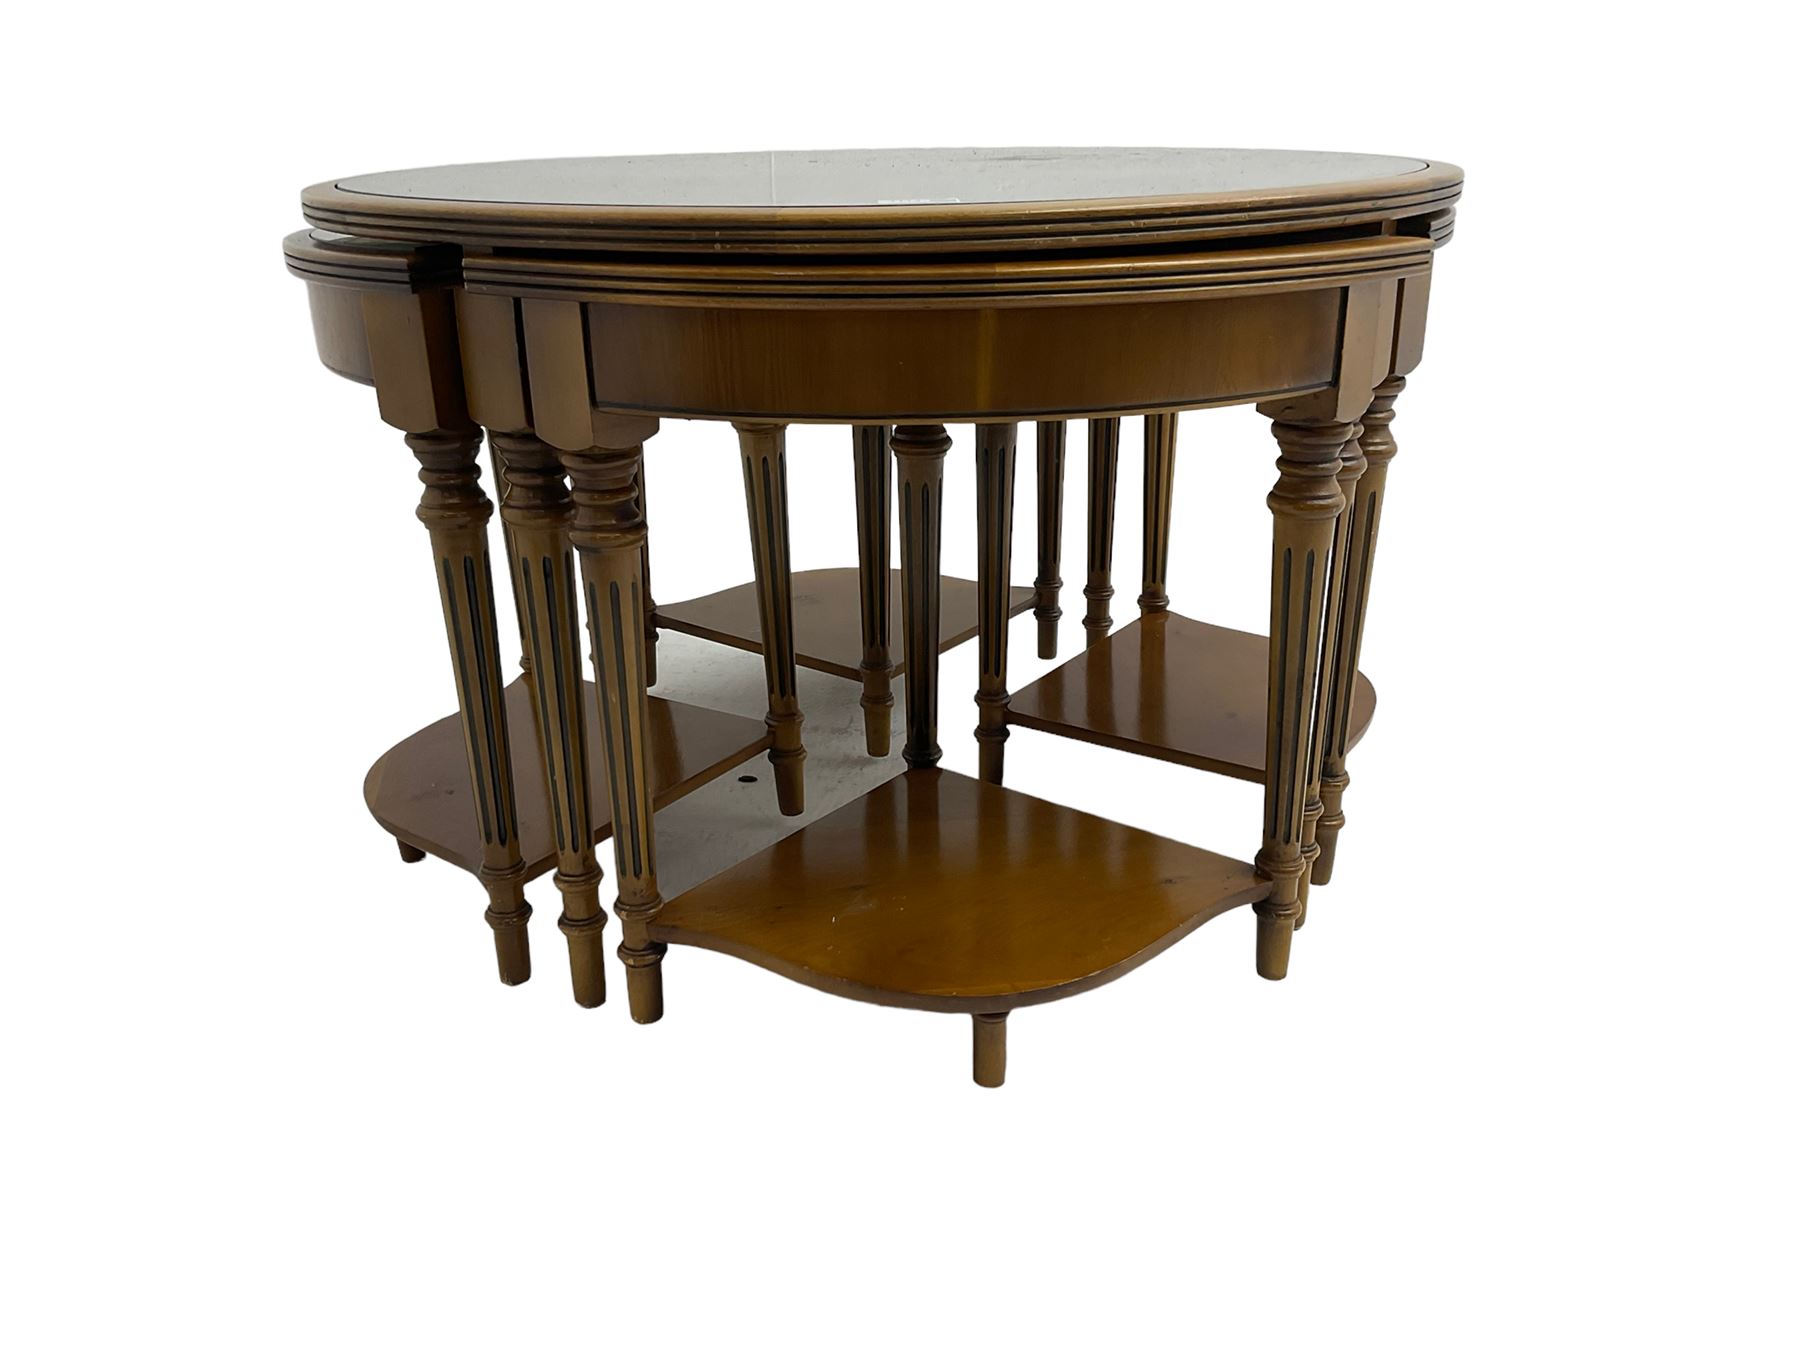 Yew wood circular coffee table with four nesting tables - Image 3 of 5